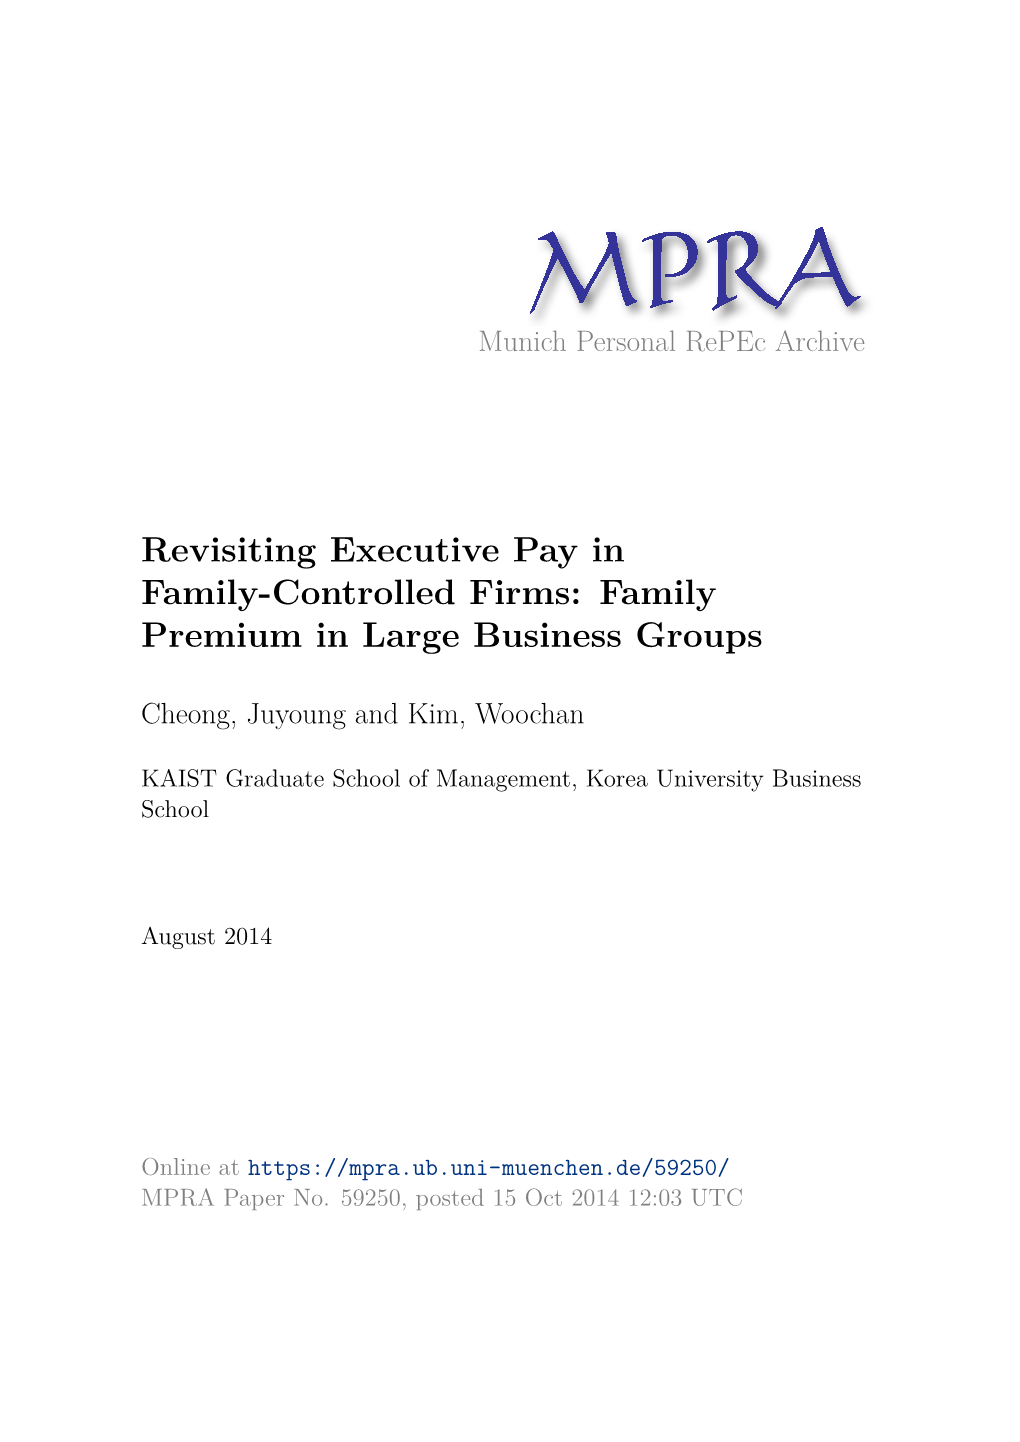 Revisiting Executive Pay in Family-Controlled Firms: Family Premium in Large Business Groups